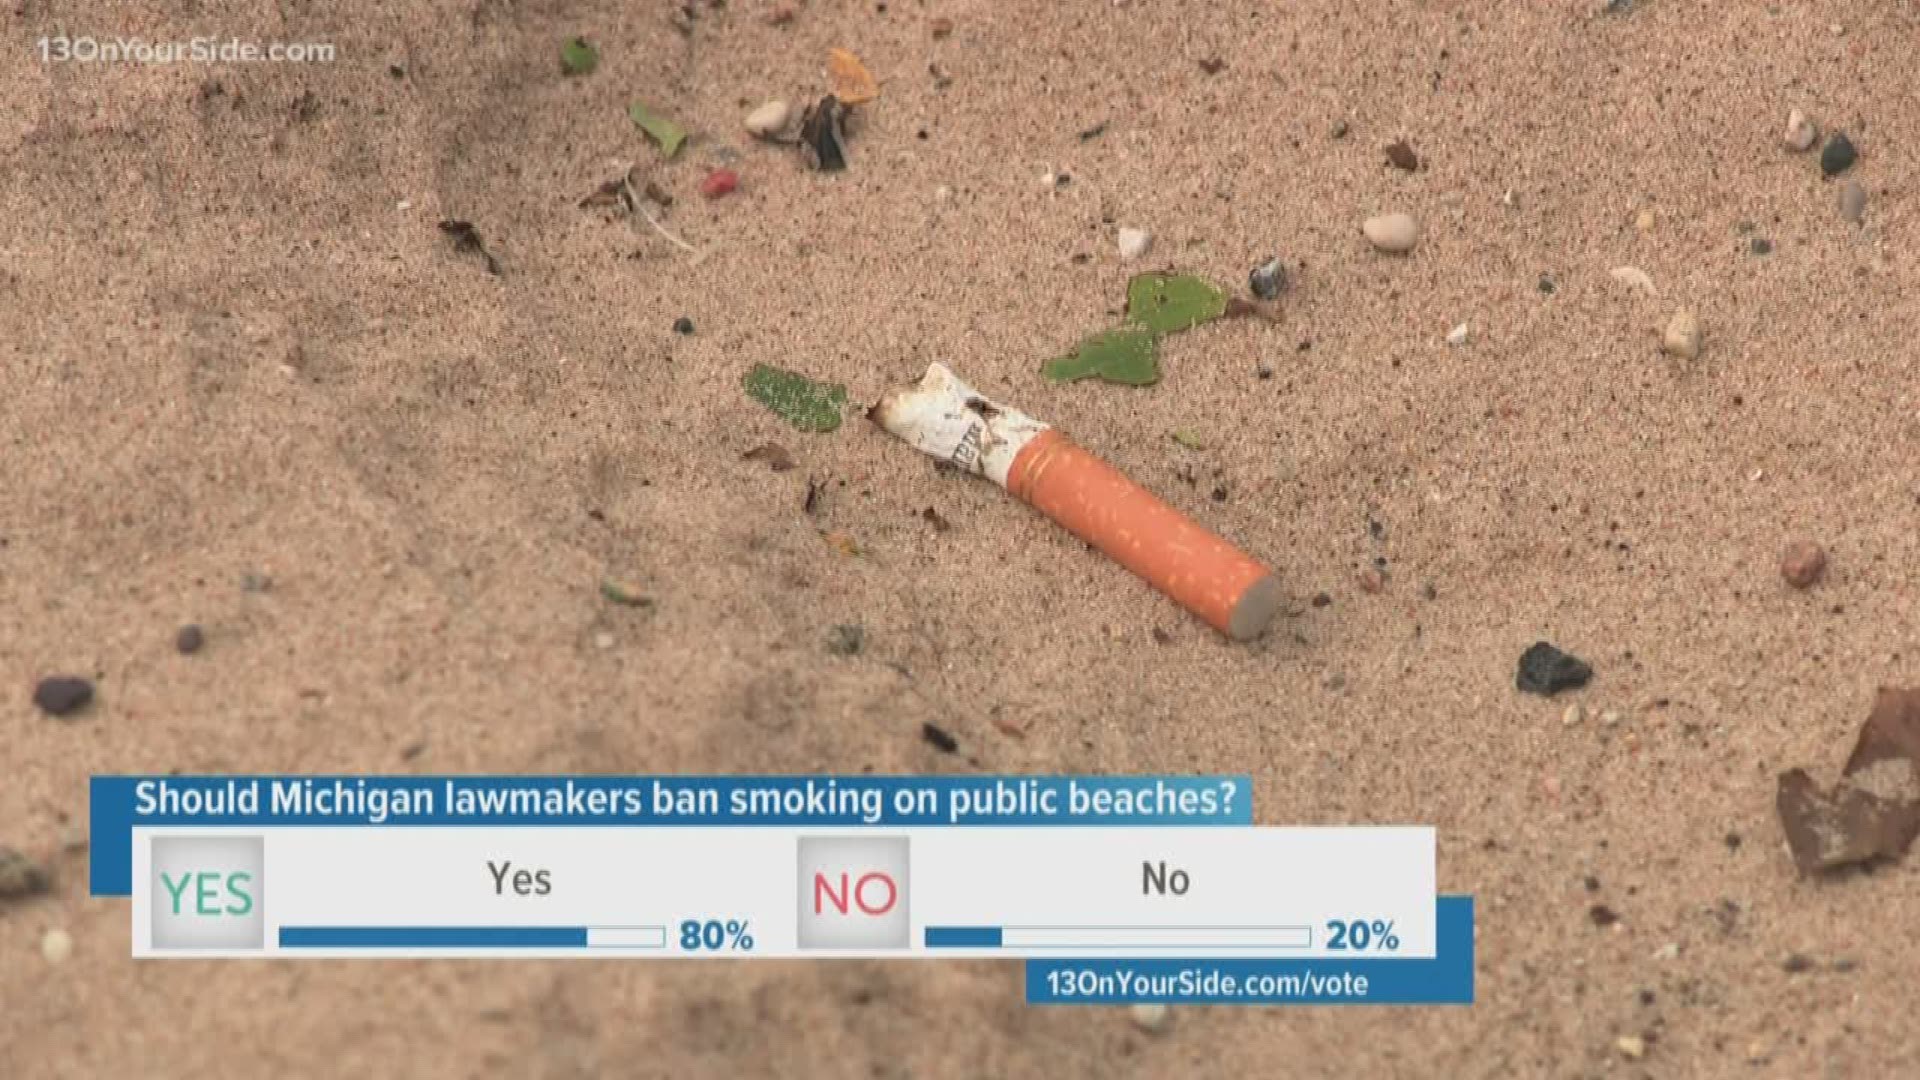 If approved, Michigan would join only a handful of states that ban smoking on public beaches.